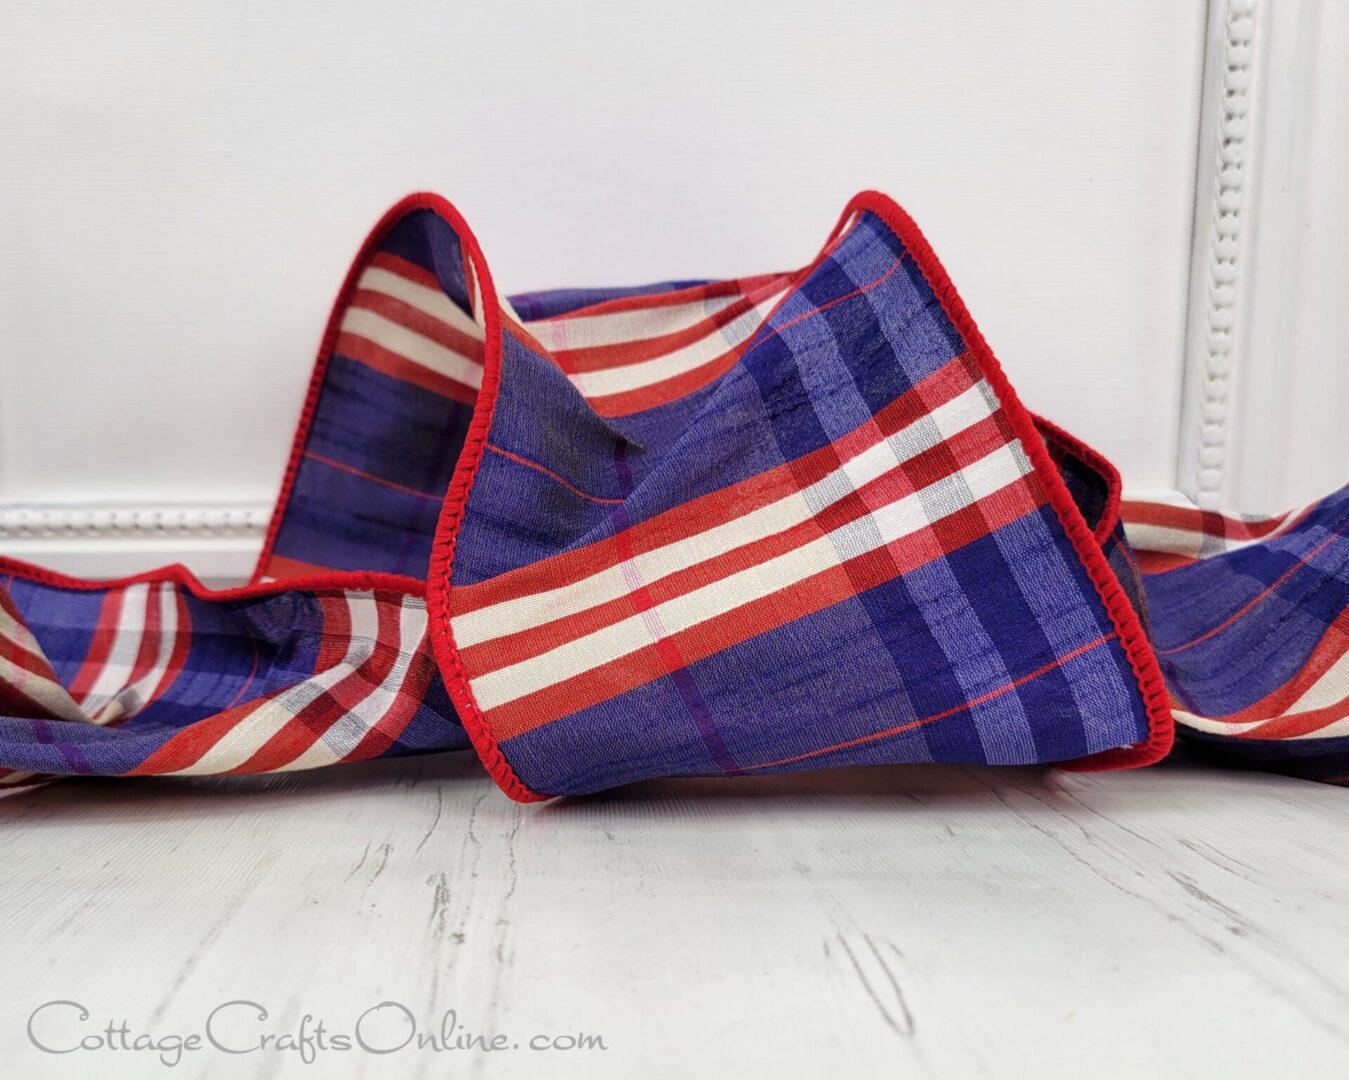 A folded blanket with red, white and blue stripes.